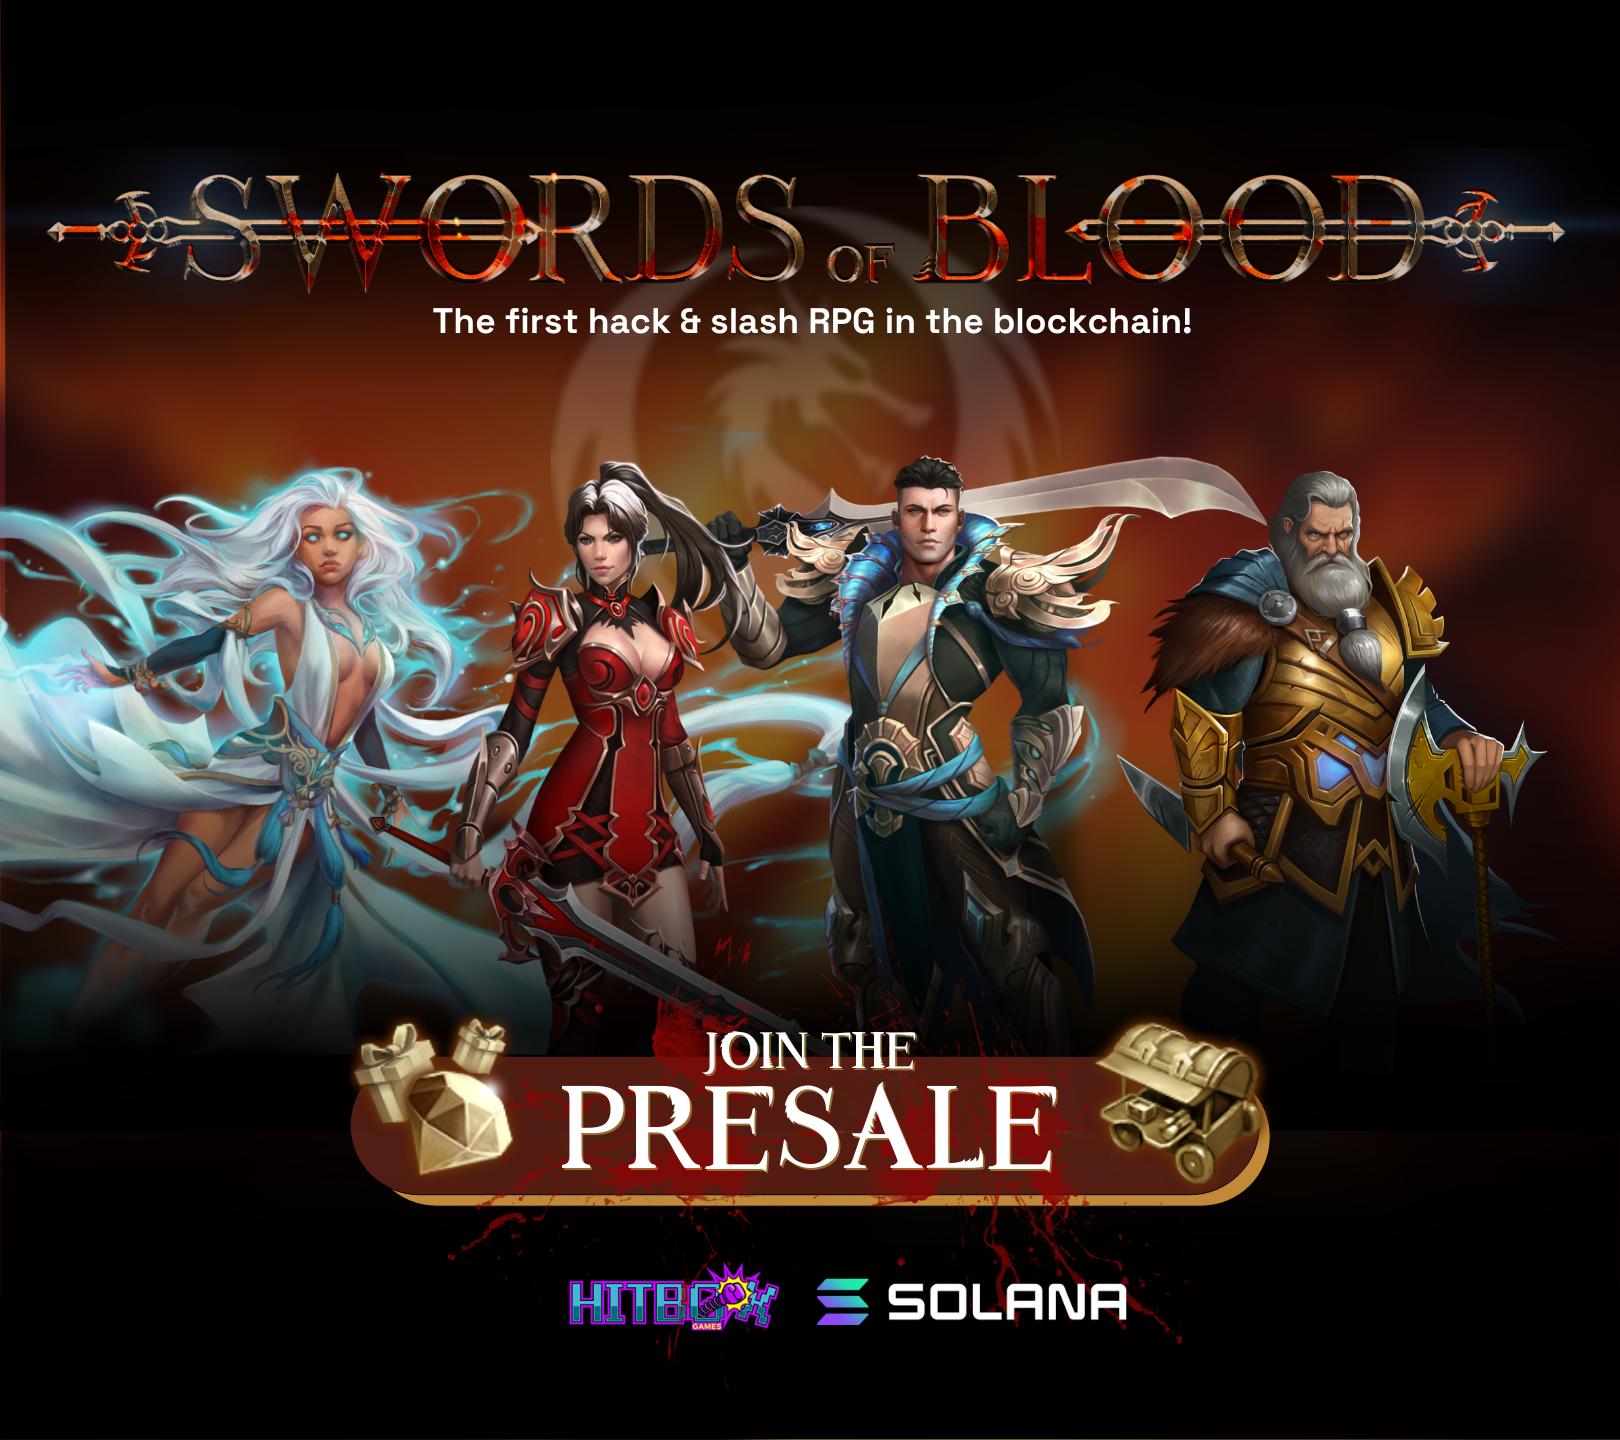 , Swords of Blood opens the gateway for traditional online gamers to seamlessly transition into web3 gaming